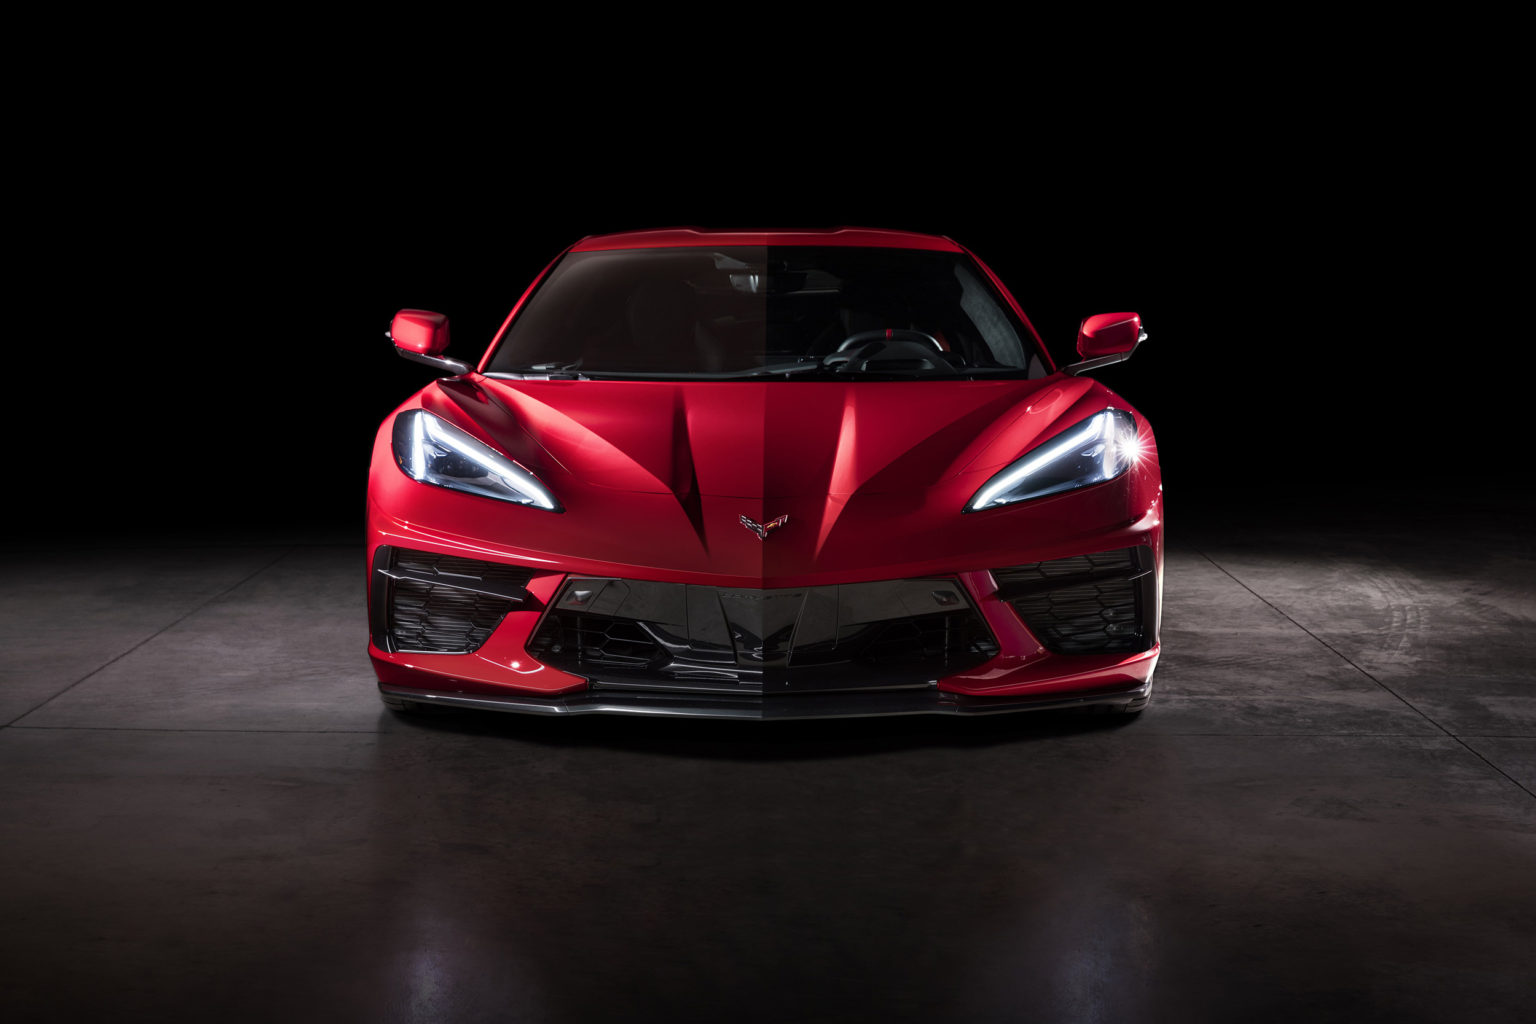 The Chevrolet Corvette has been completely redesigned for the 2020 model year and for some, the fresh body, face, and engine layout is controversial.